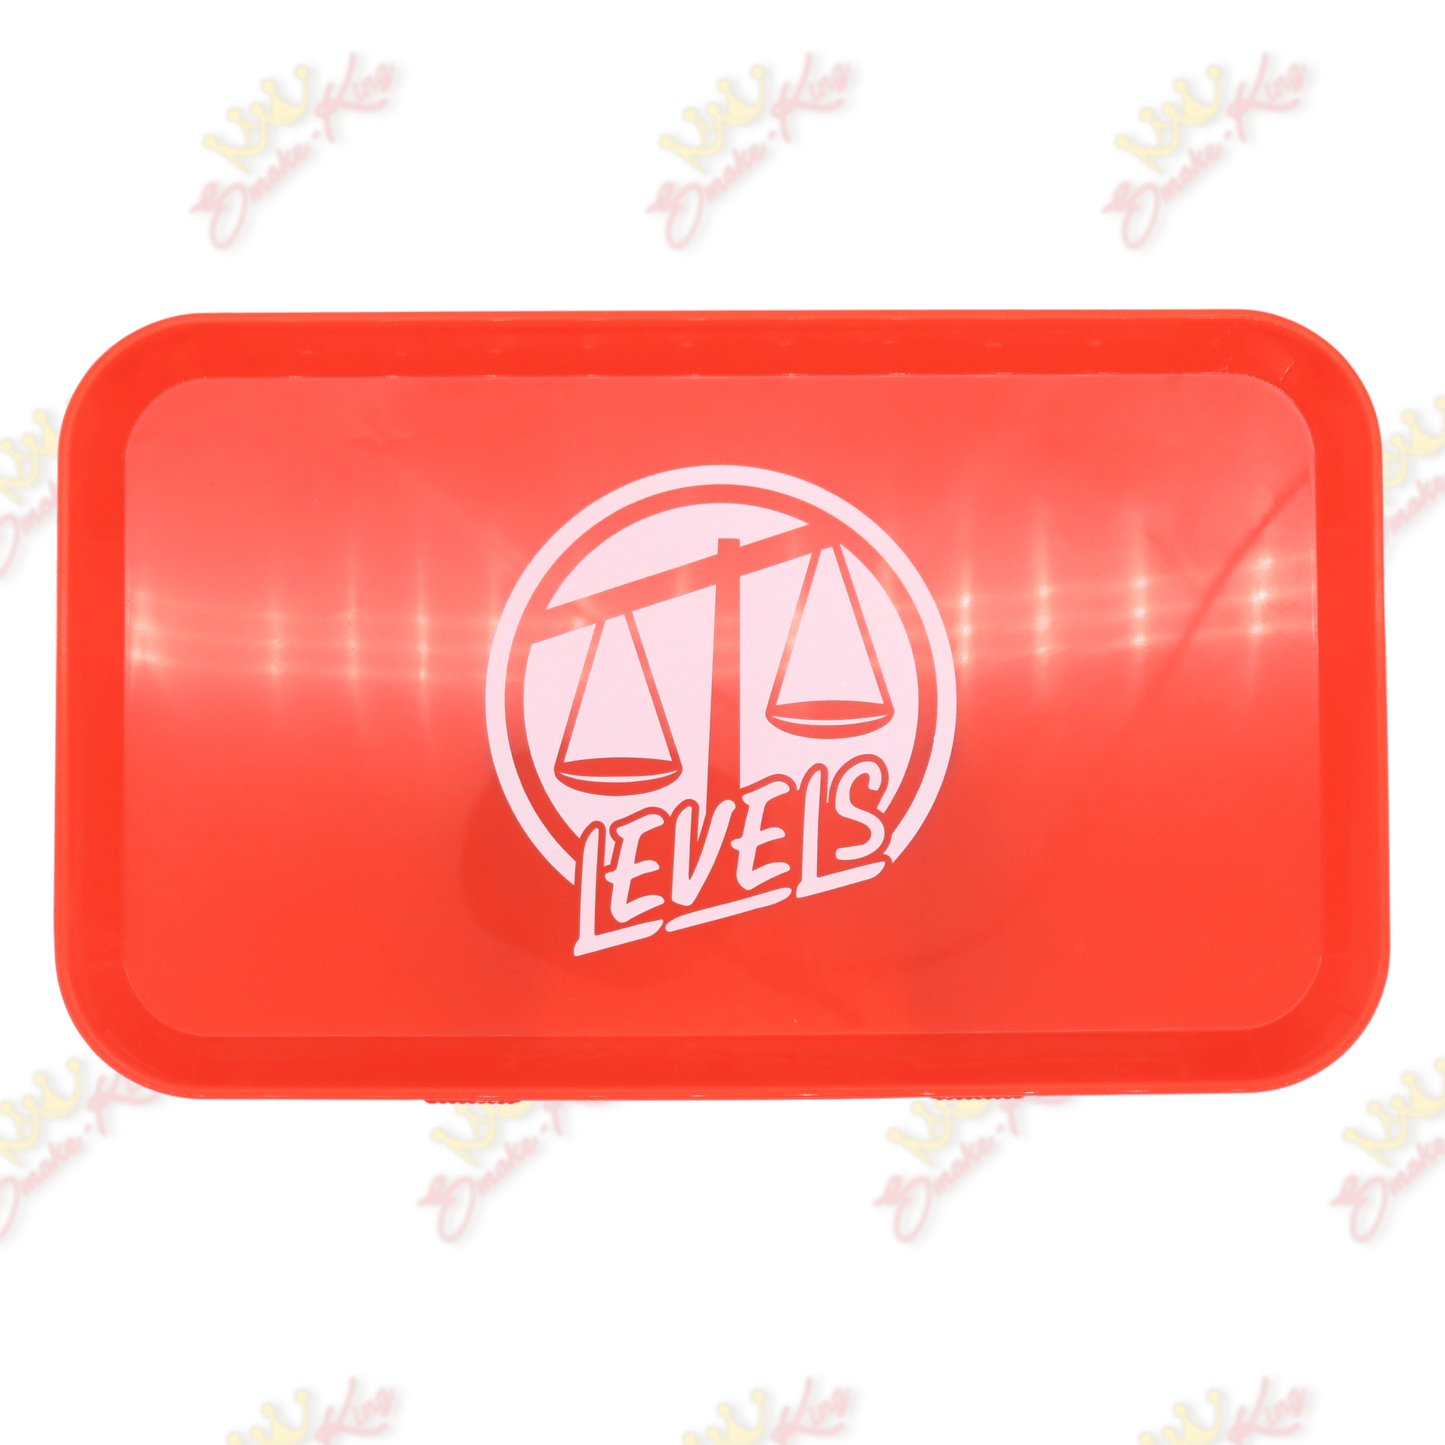 Levels Levels Rolling Tray + Scale Levels Rolling Tray + Scale | Rolling Tray Set | Smoke-King 